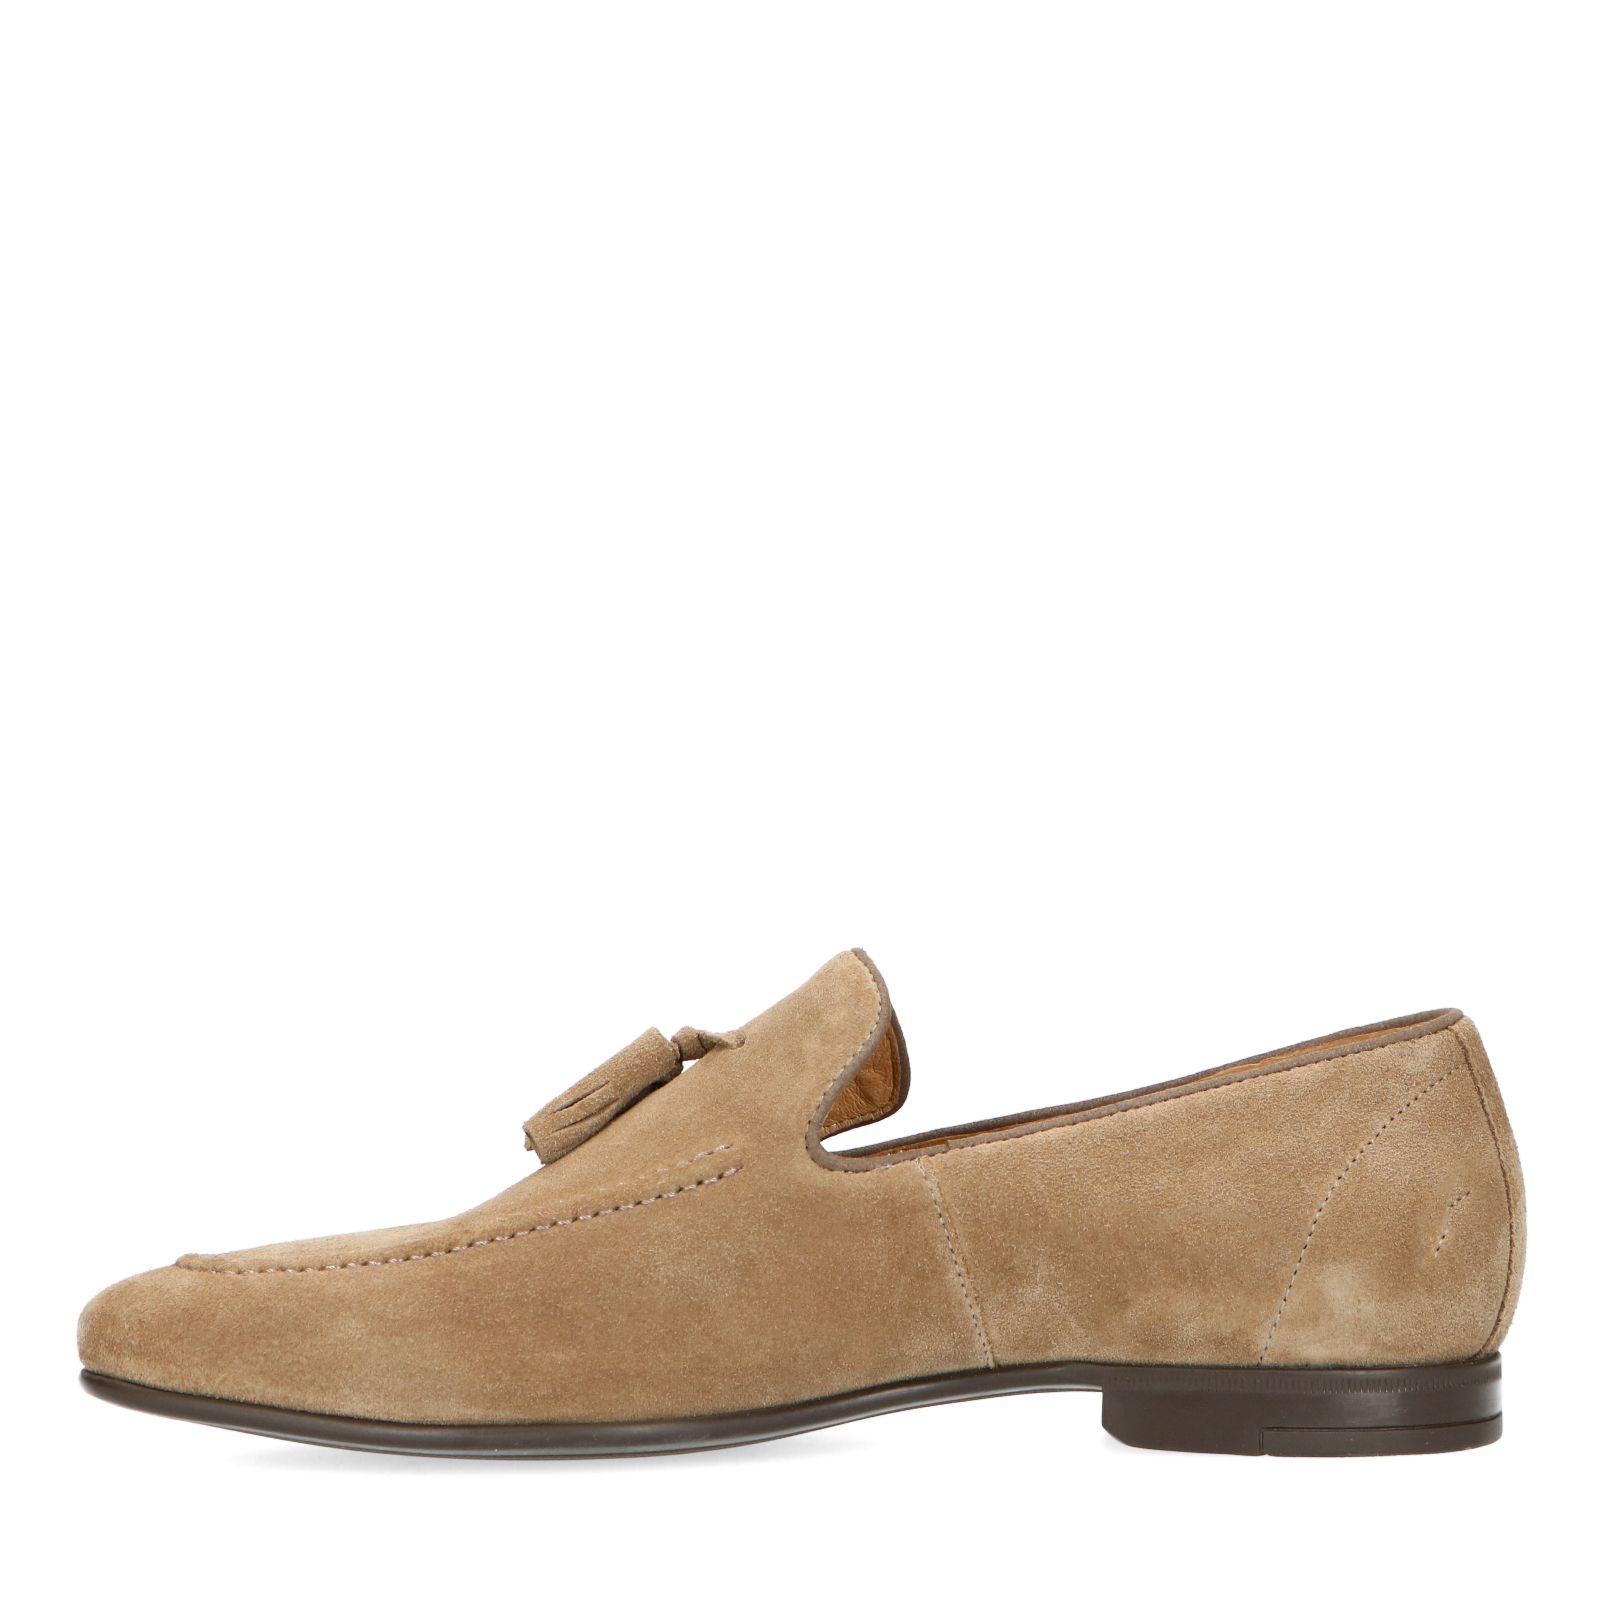 Taupe suède loafers Manfield Heren Schoenen Instappers Loafers 